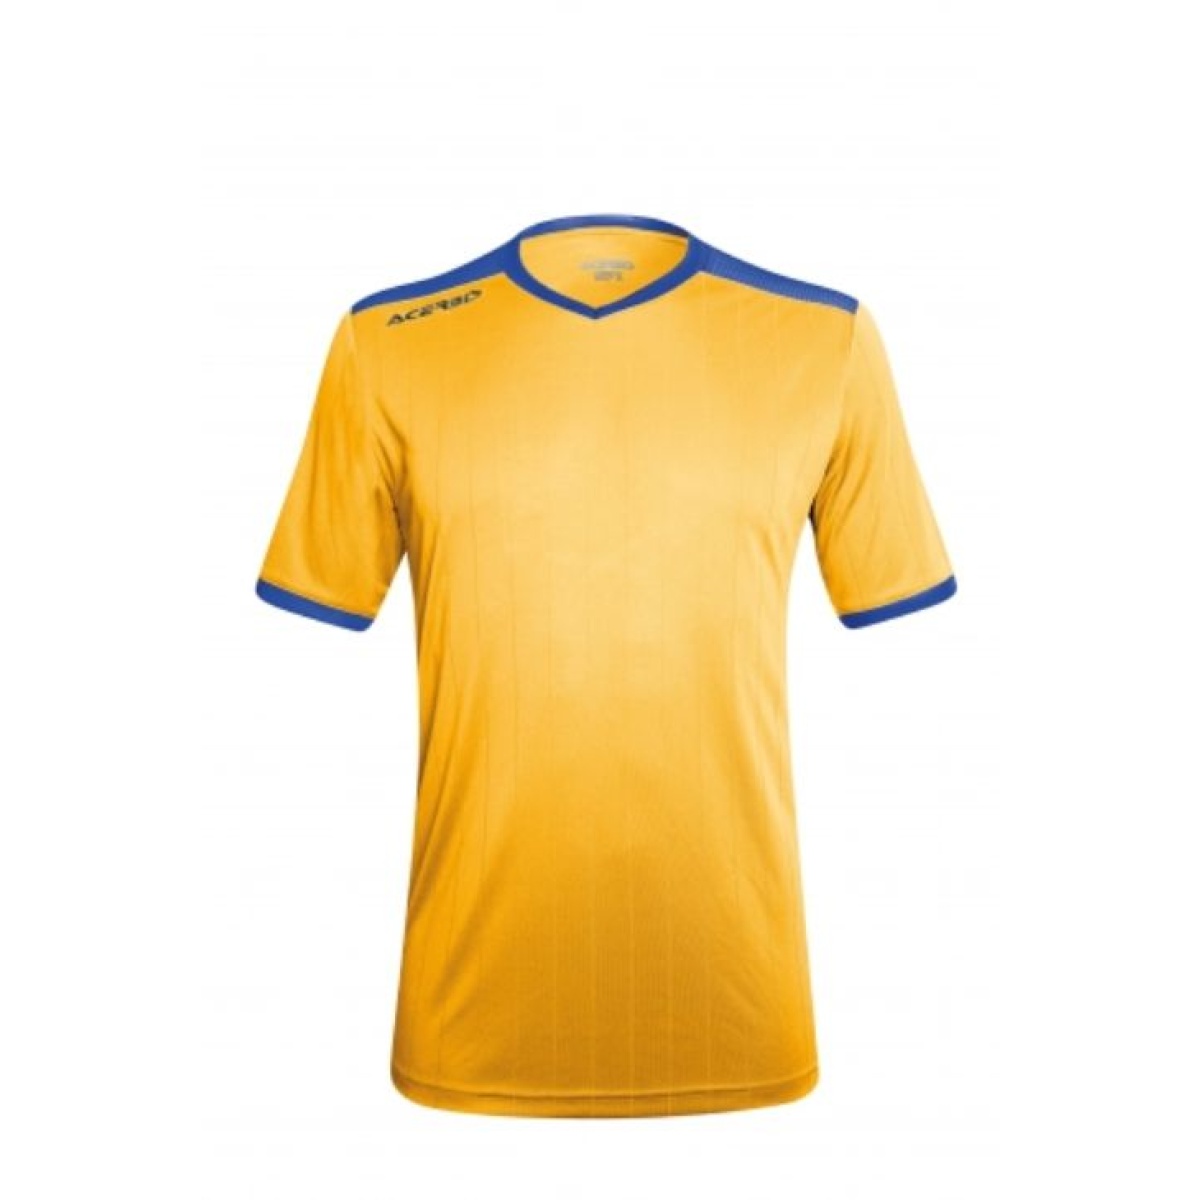 Canvey Island Youth FC - CIYFC Home Jersey S/Sleeve, Canvey Island Youth FC, Canvey Island United FC, Custom Image Product